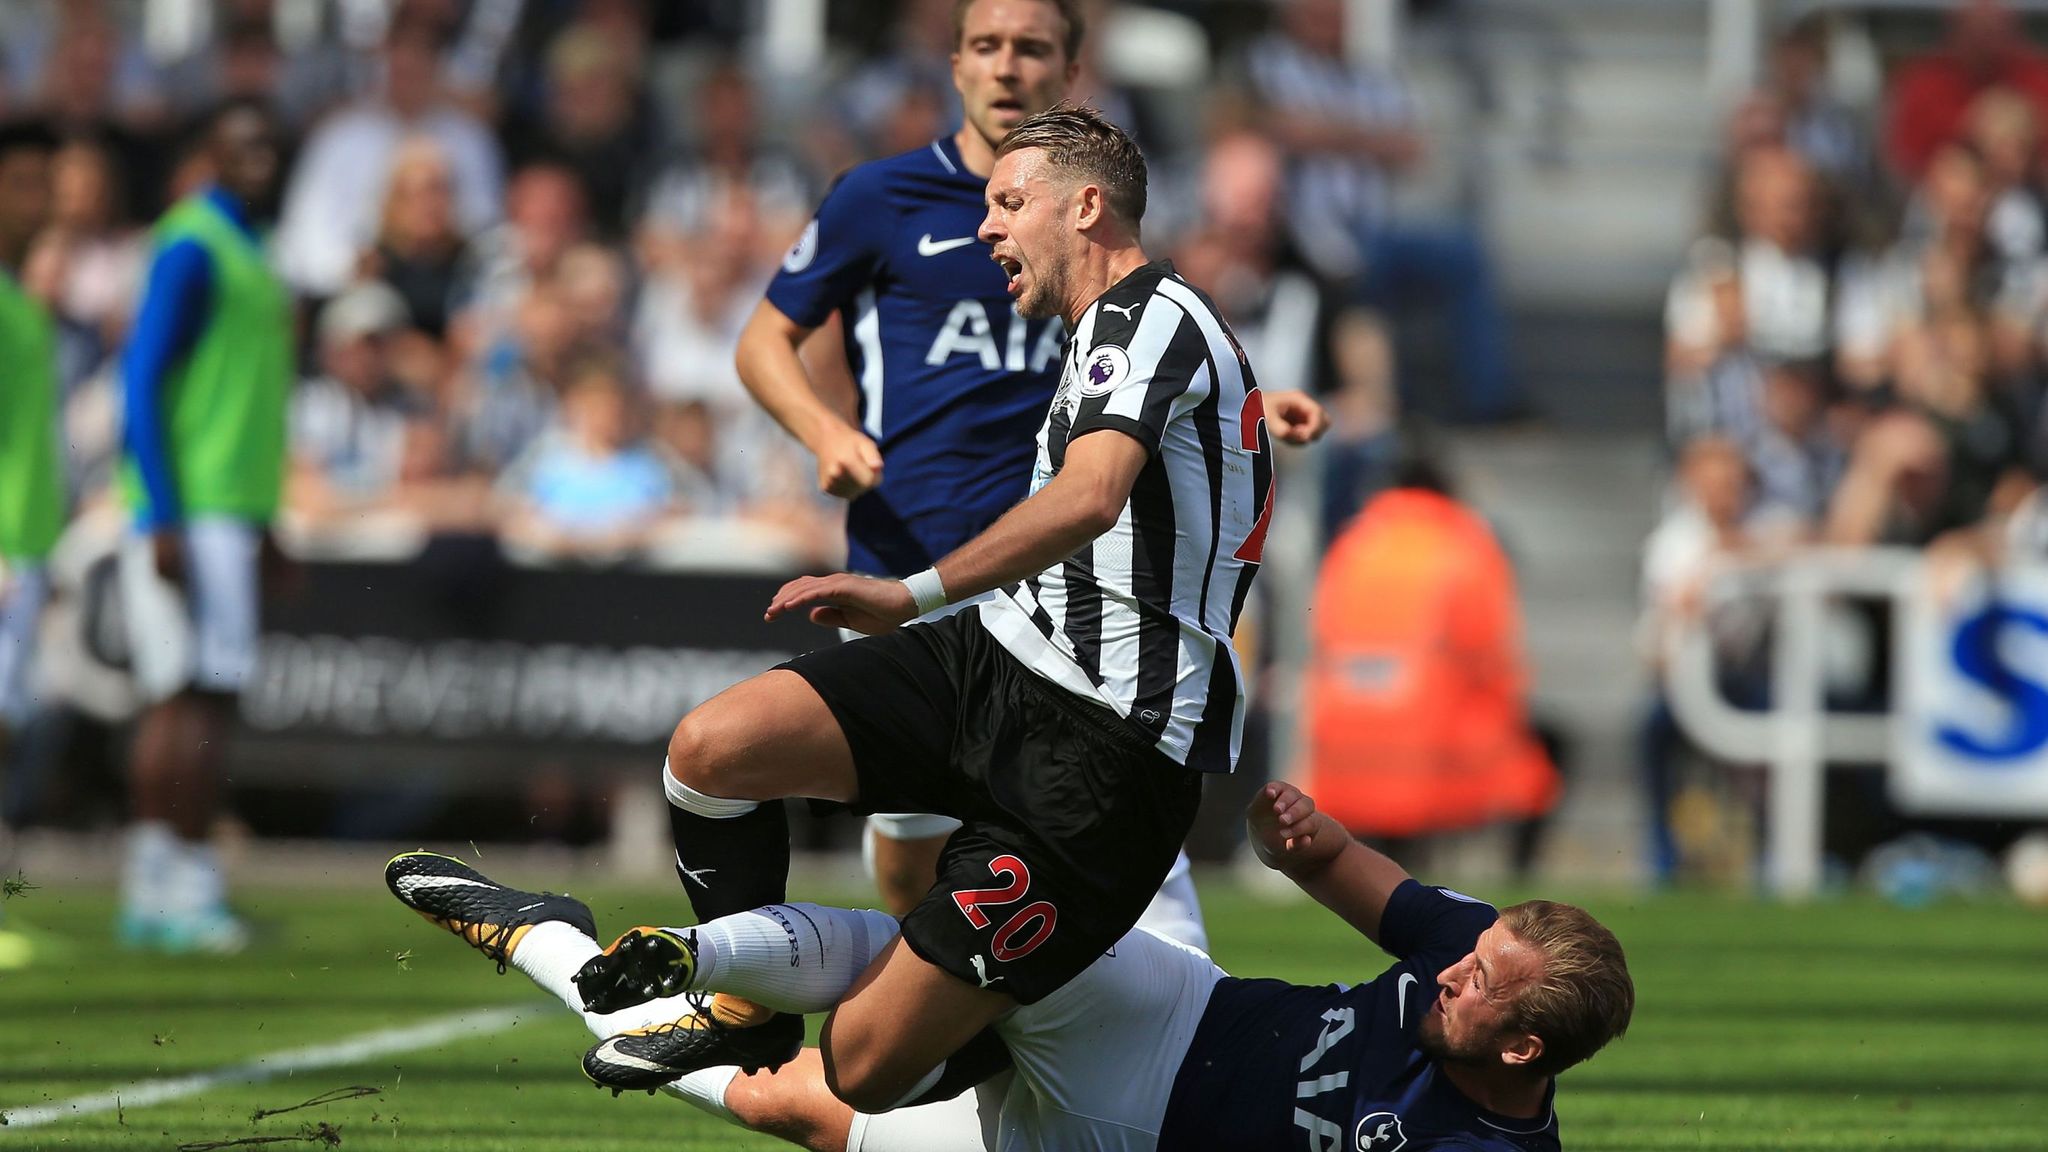 Newcastle's Florian Lejeune hits out at Harry Kane for 'red card' tackle, Football News